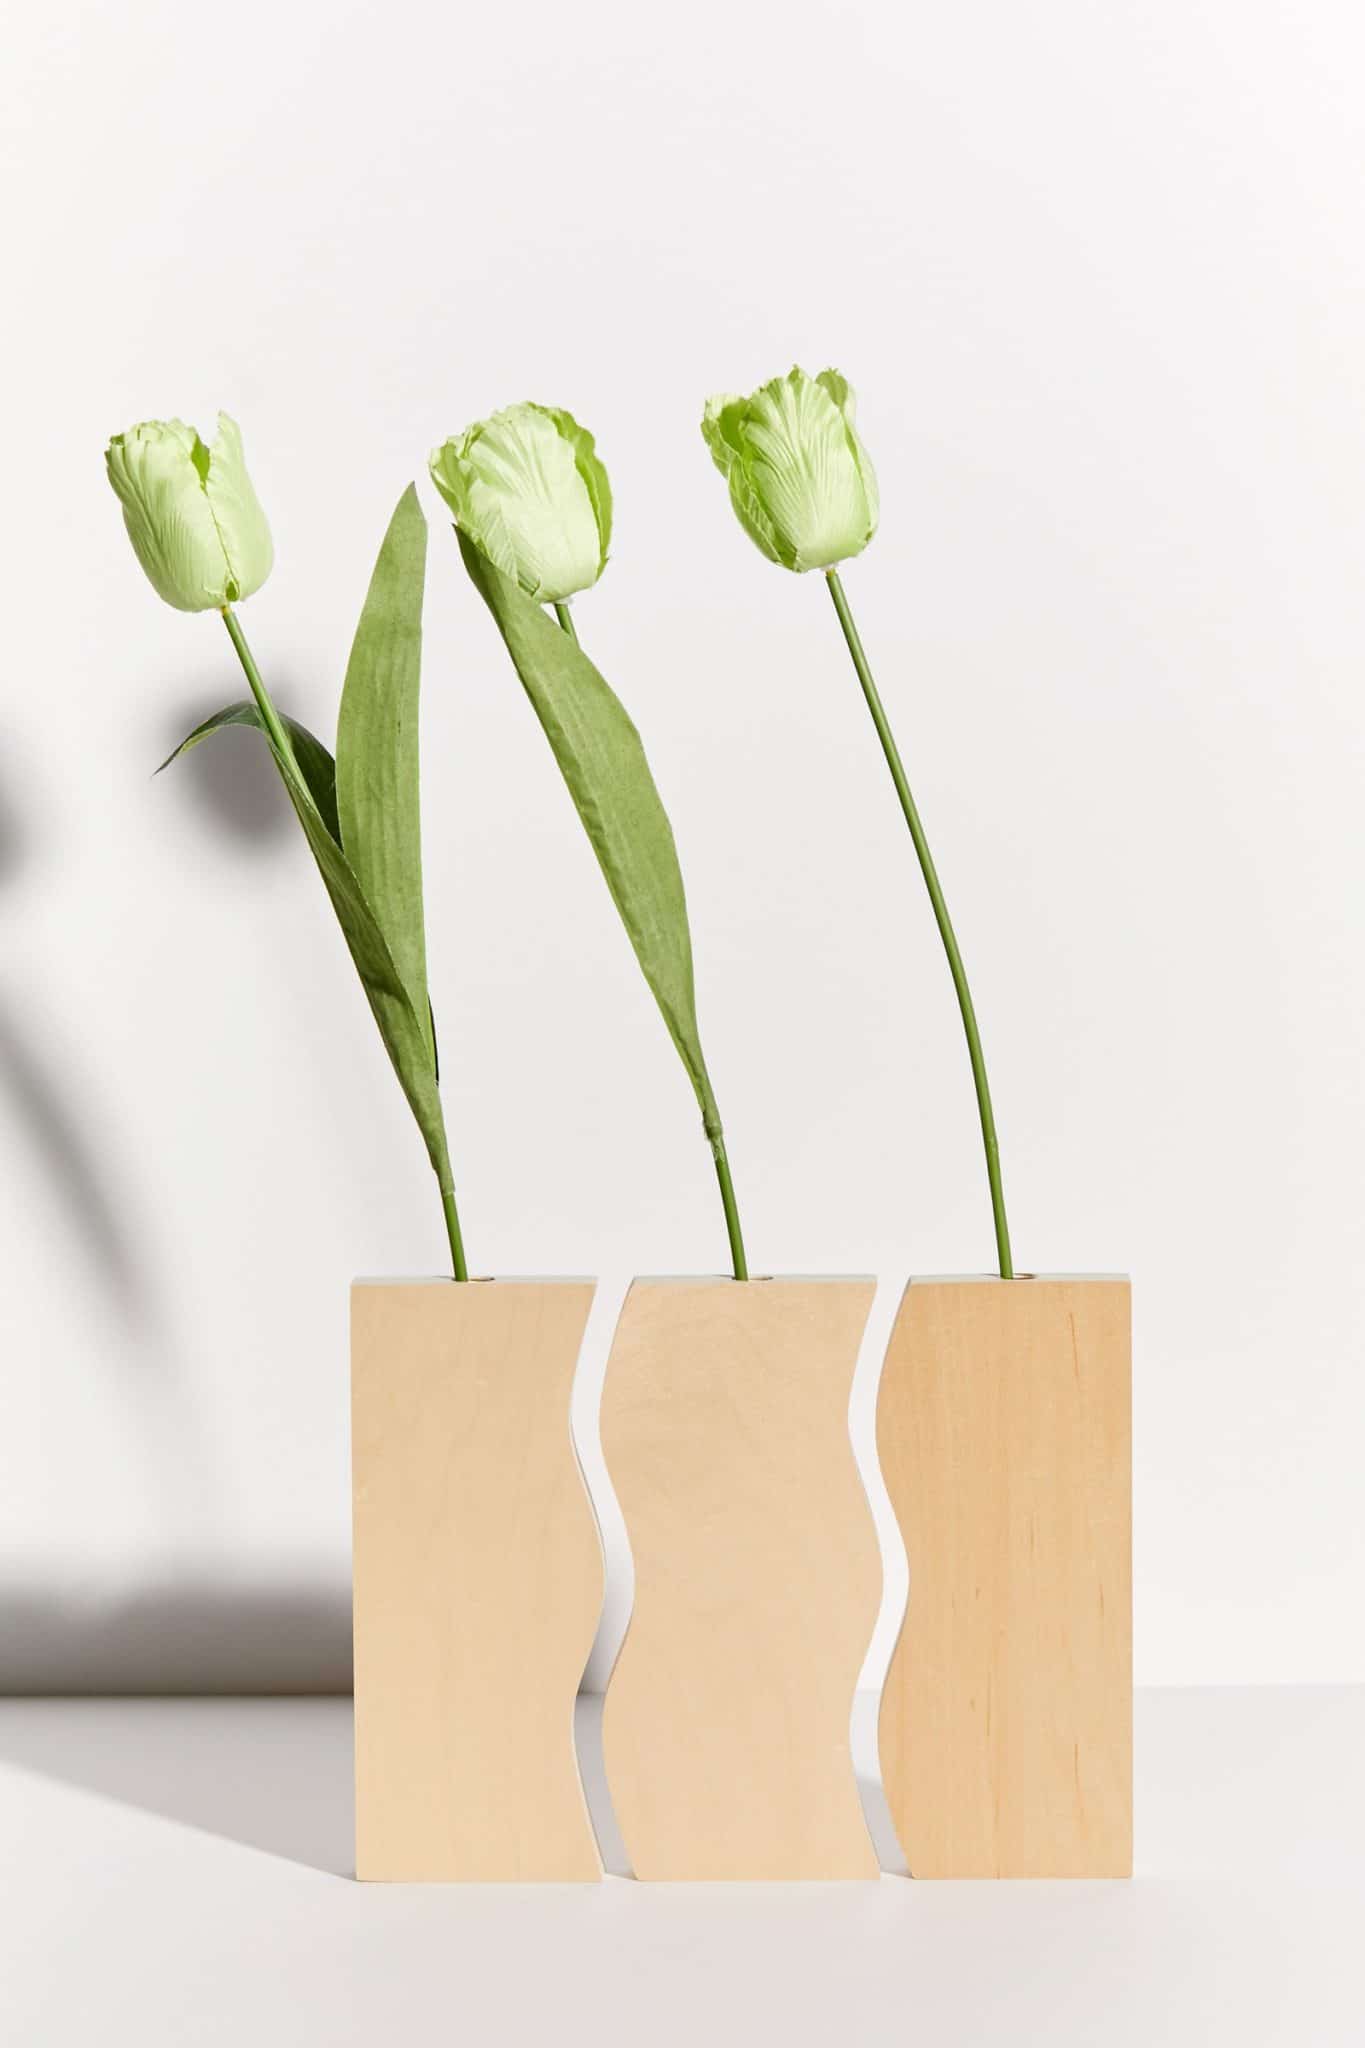 Wooden vase set on Urban Outfitters x Clever